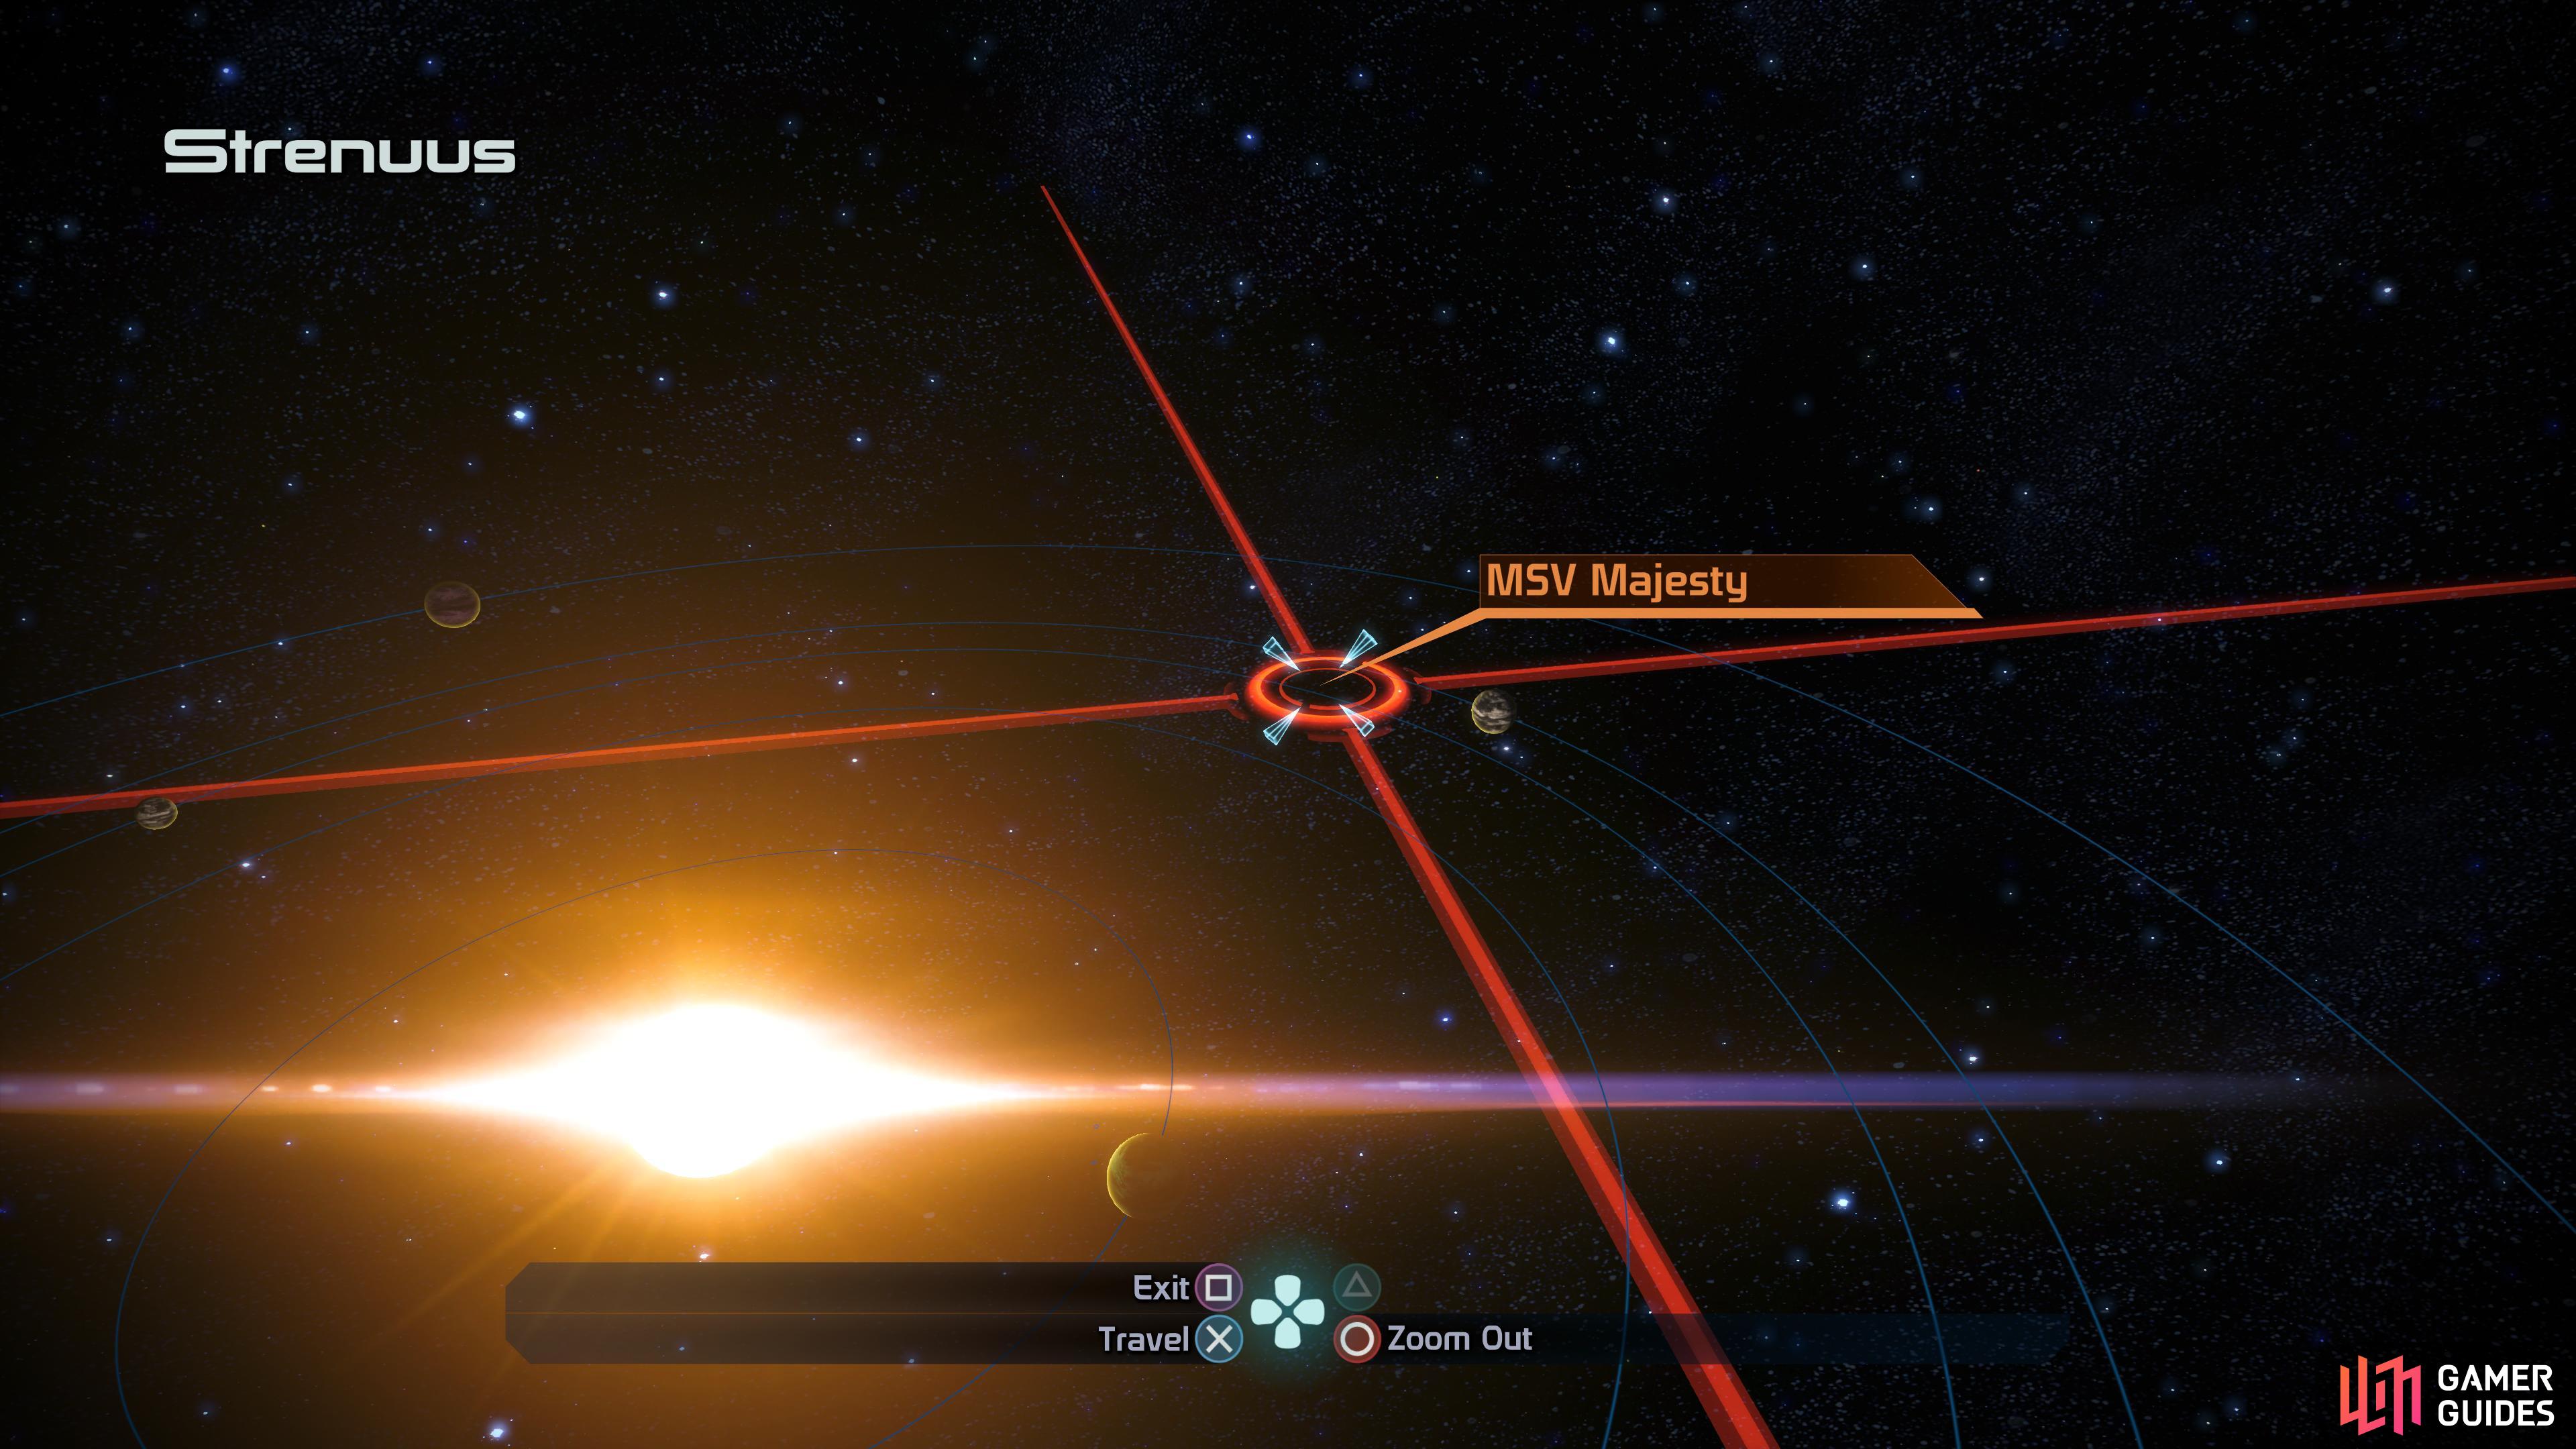 You’ll find the sacked MSV Majesty floating around in the Strenuus system.